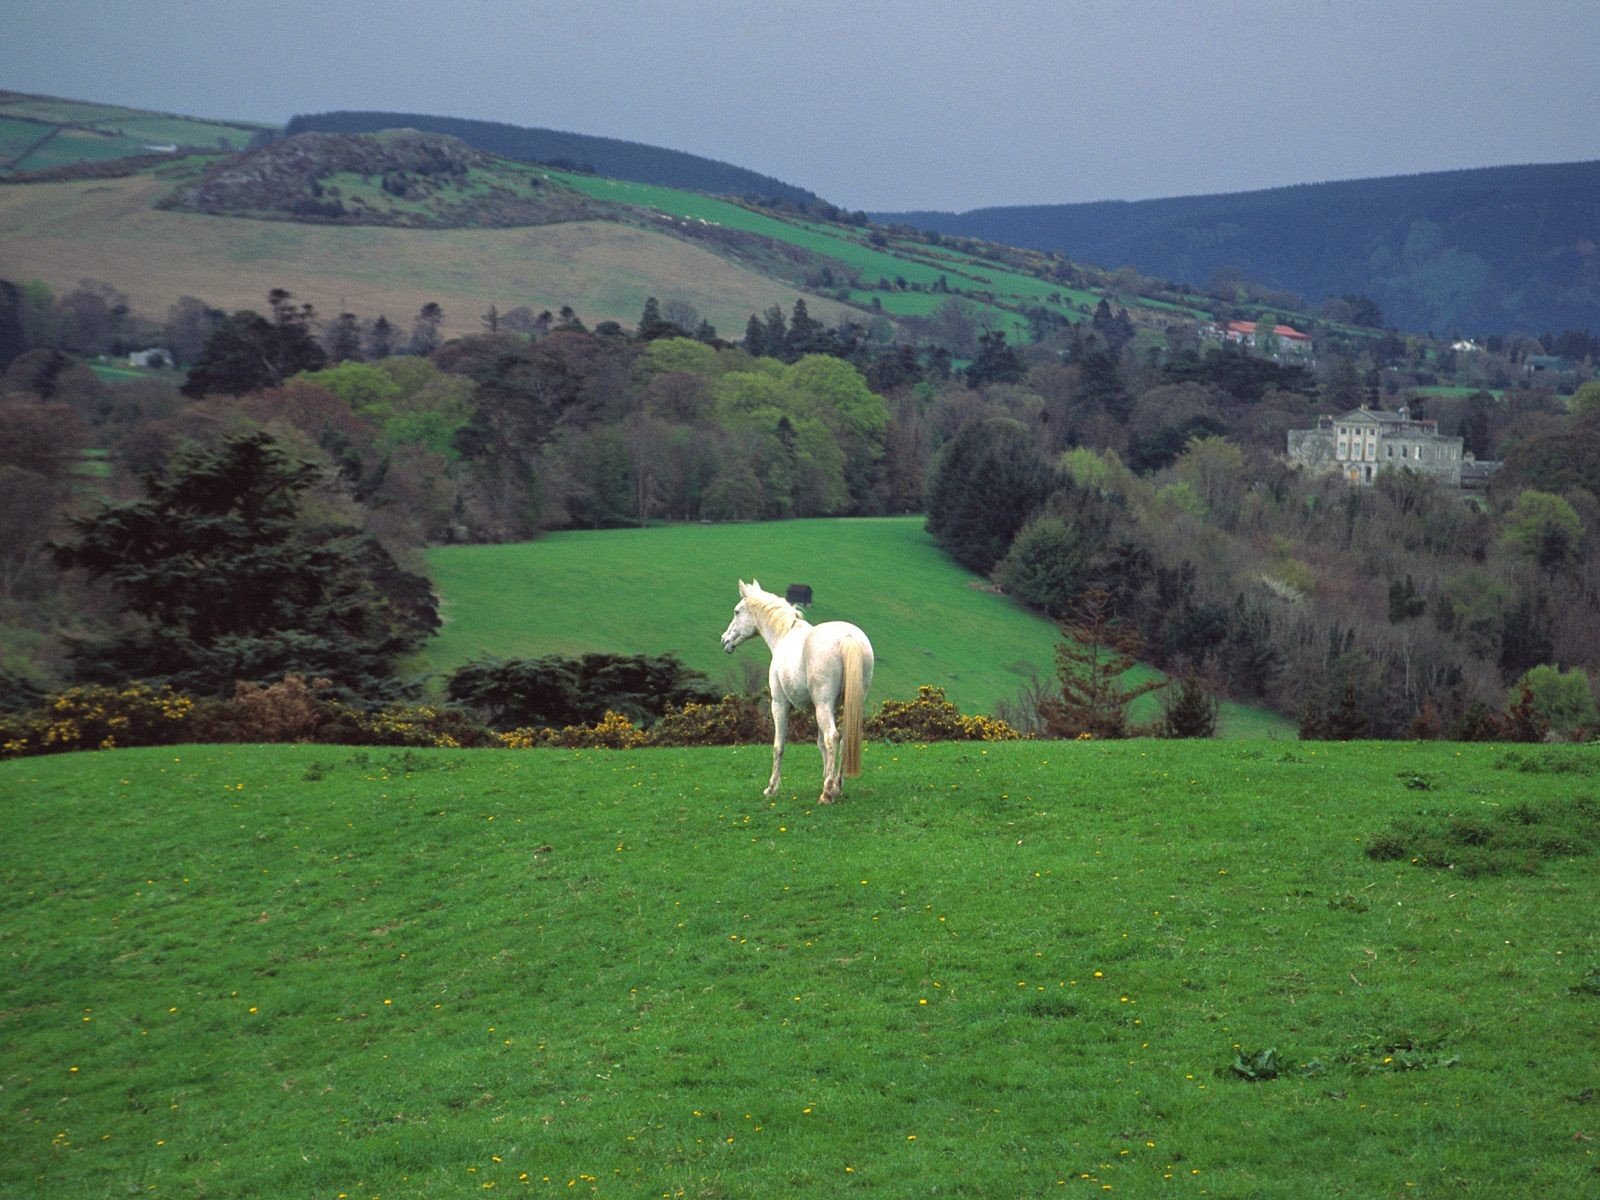 green, Nature, Trees, Forests, Hills, Ireland, Horses, Countryside, Skyscapes, Castle Wallpaper